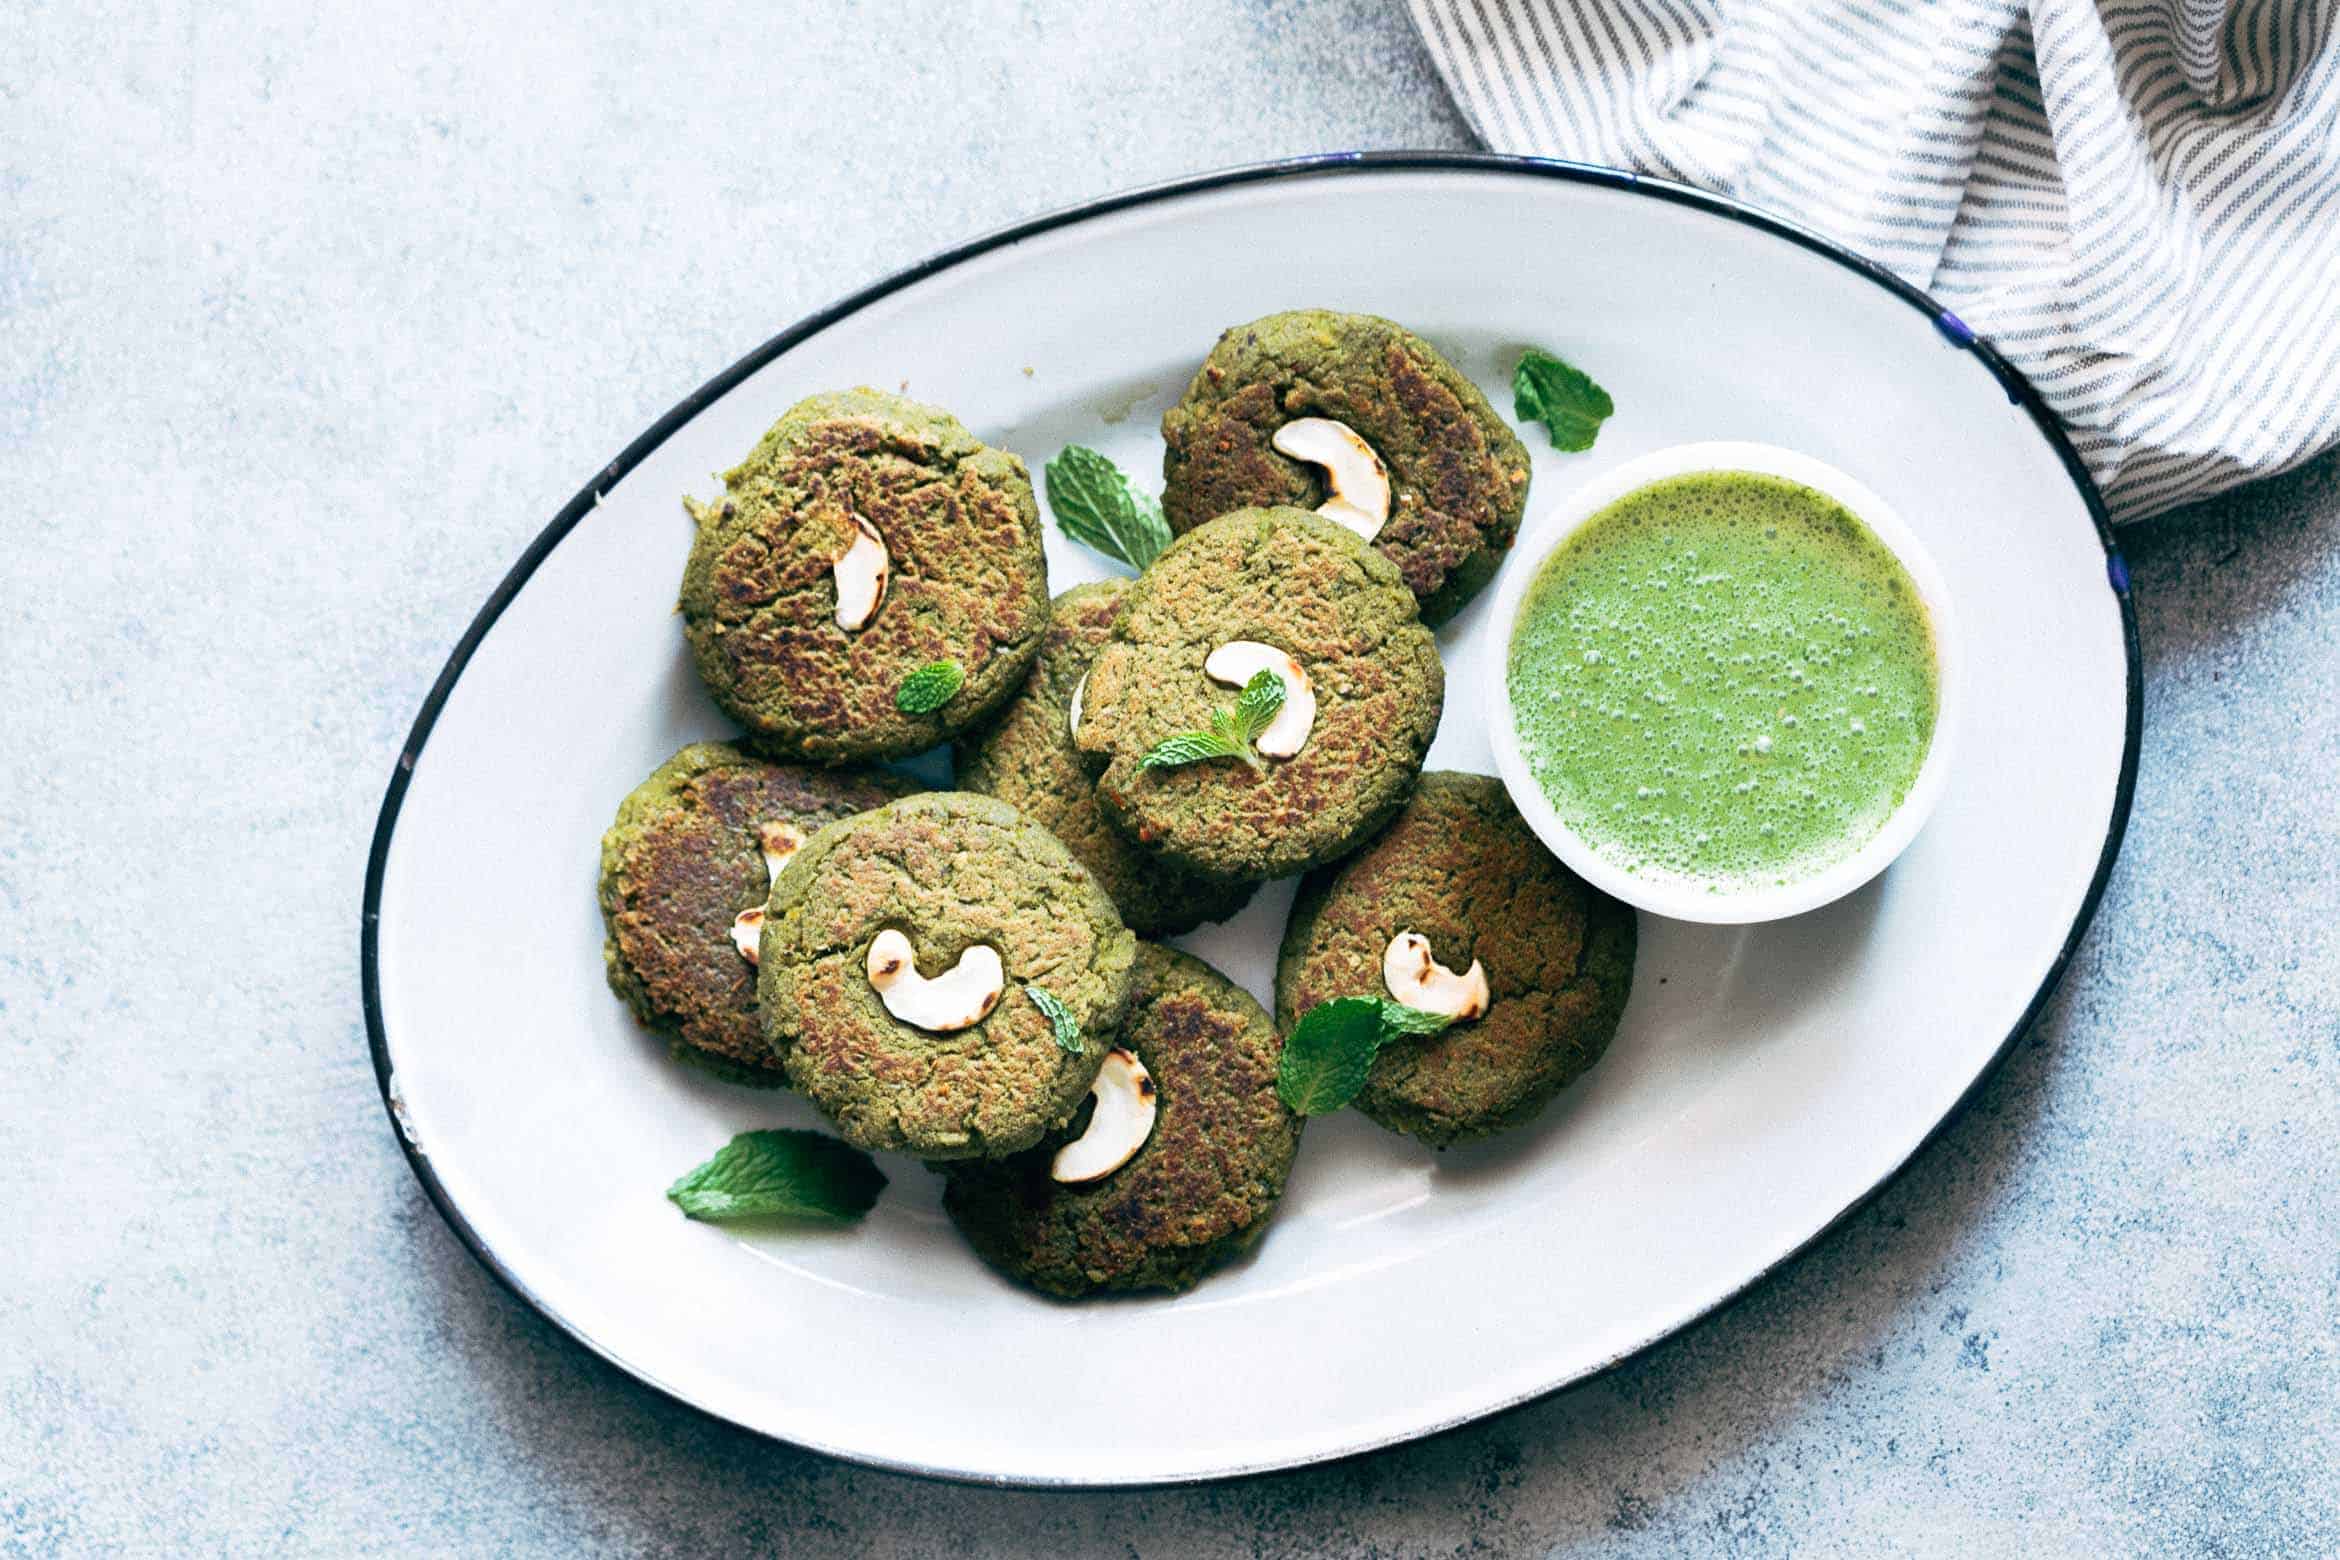 Easy to make soya hara bhara kebabs are a healthy twist to restaurant style hara bhara kebabs. These are perfect if you are looking for vegetarian kebabs!